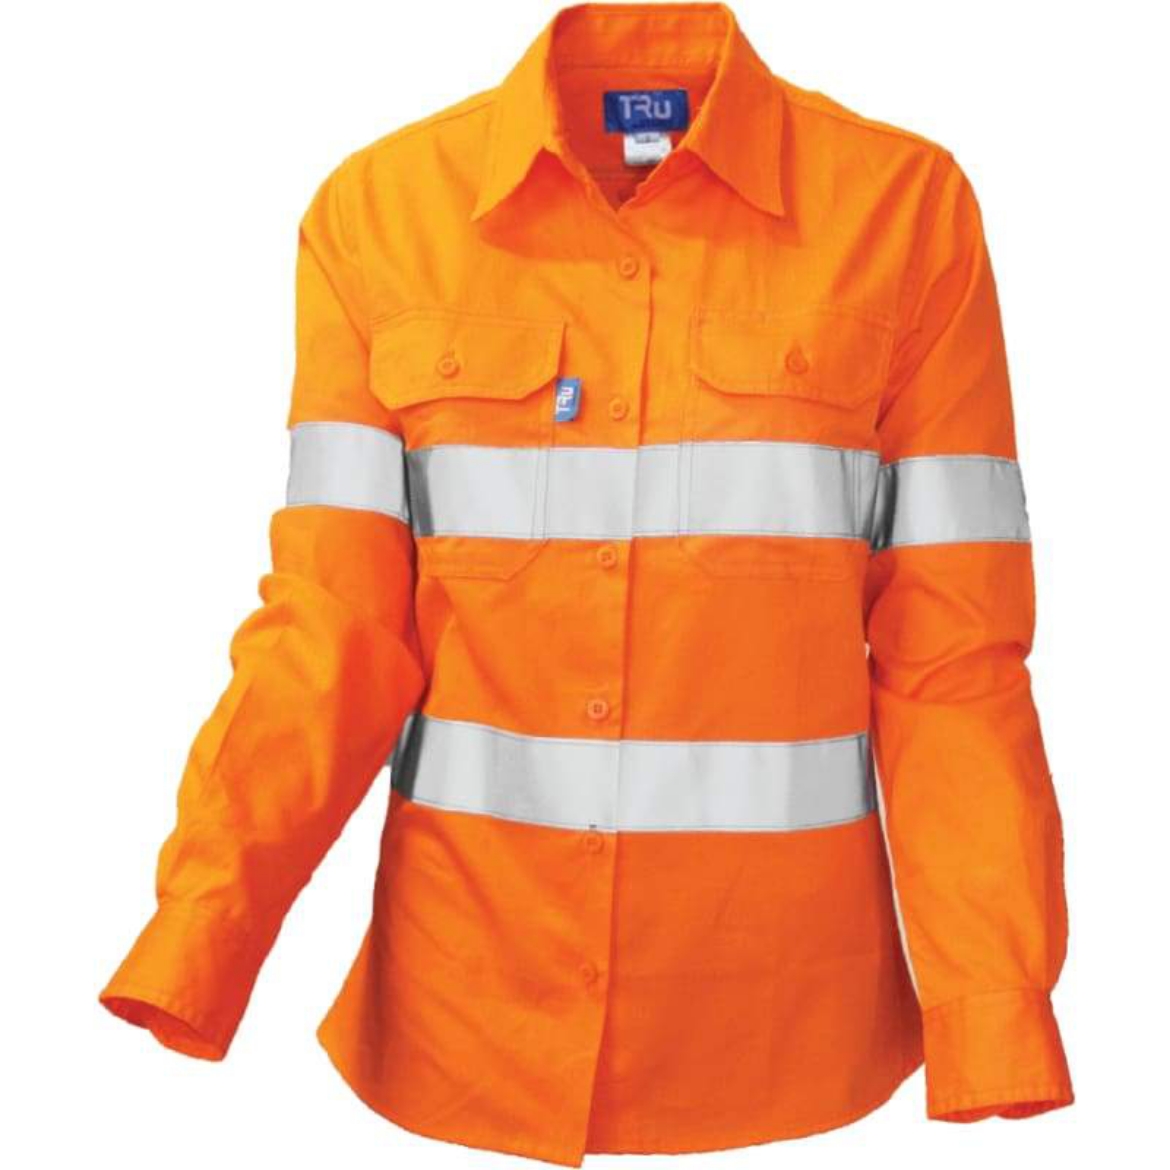 Picture of Tru Workwear, Womens, Shirt, Long Sleeve, Light Cotton Drill, 3M Tape, H Vents